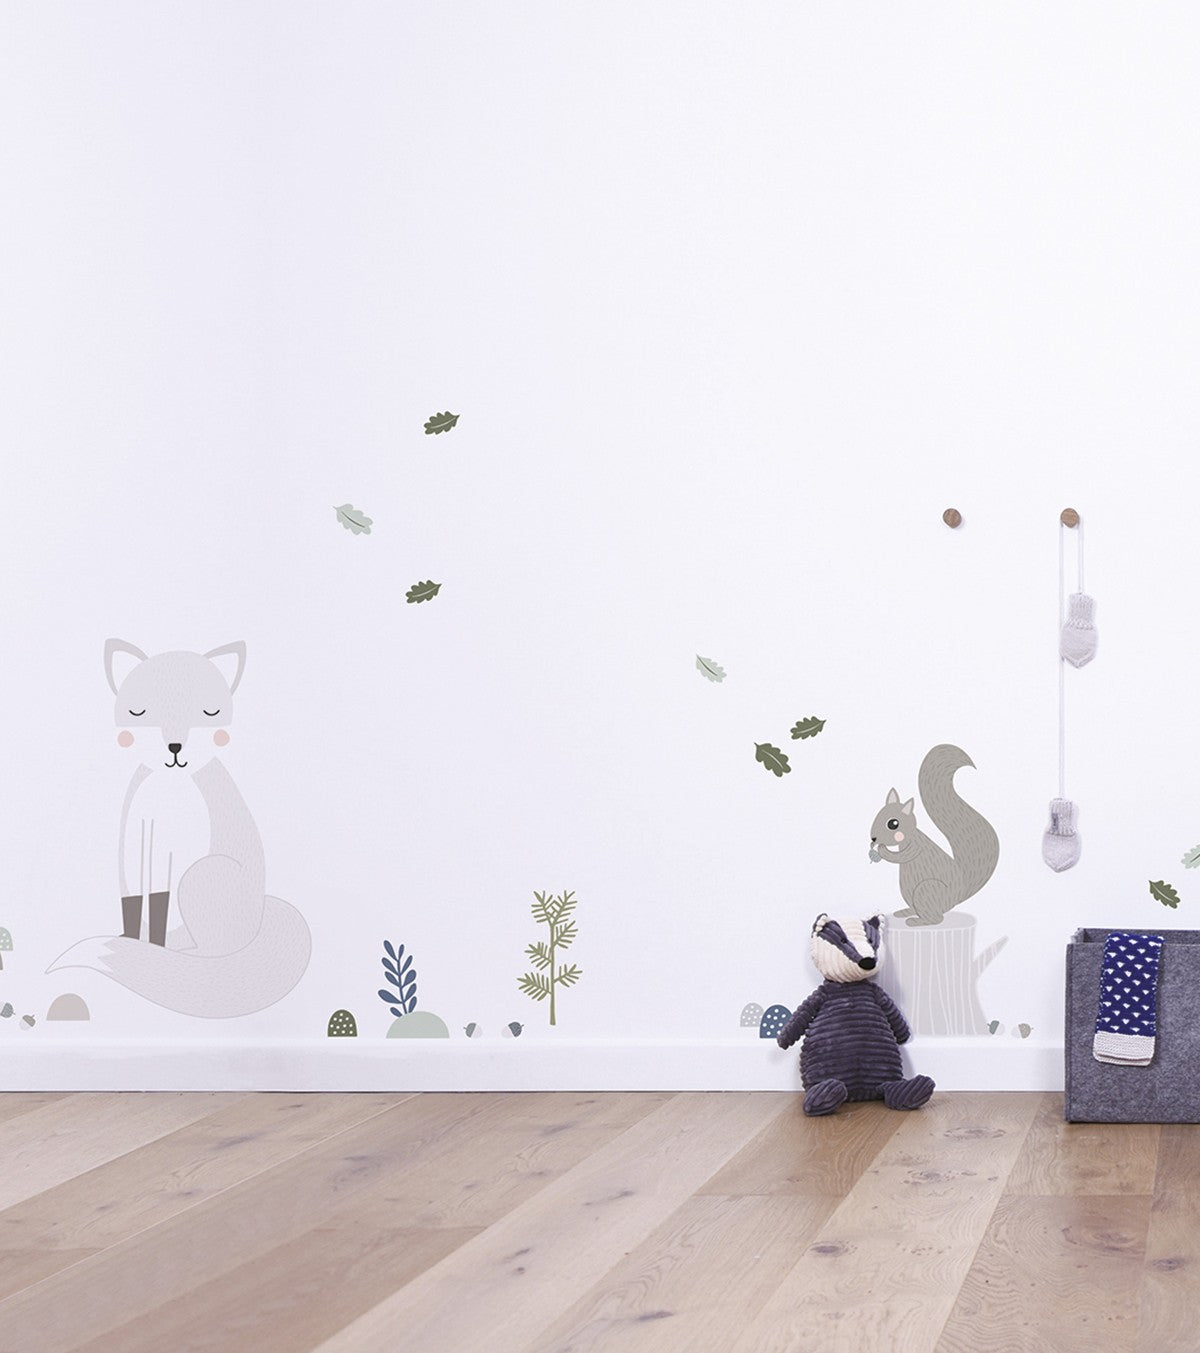 IN THE WOODS - Wall decals murals - Squirrel and mushrooms